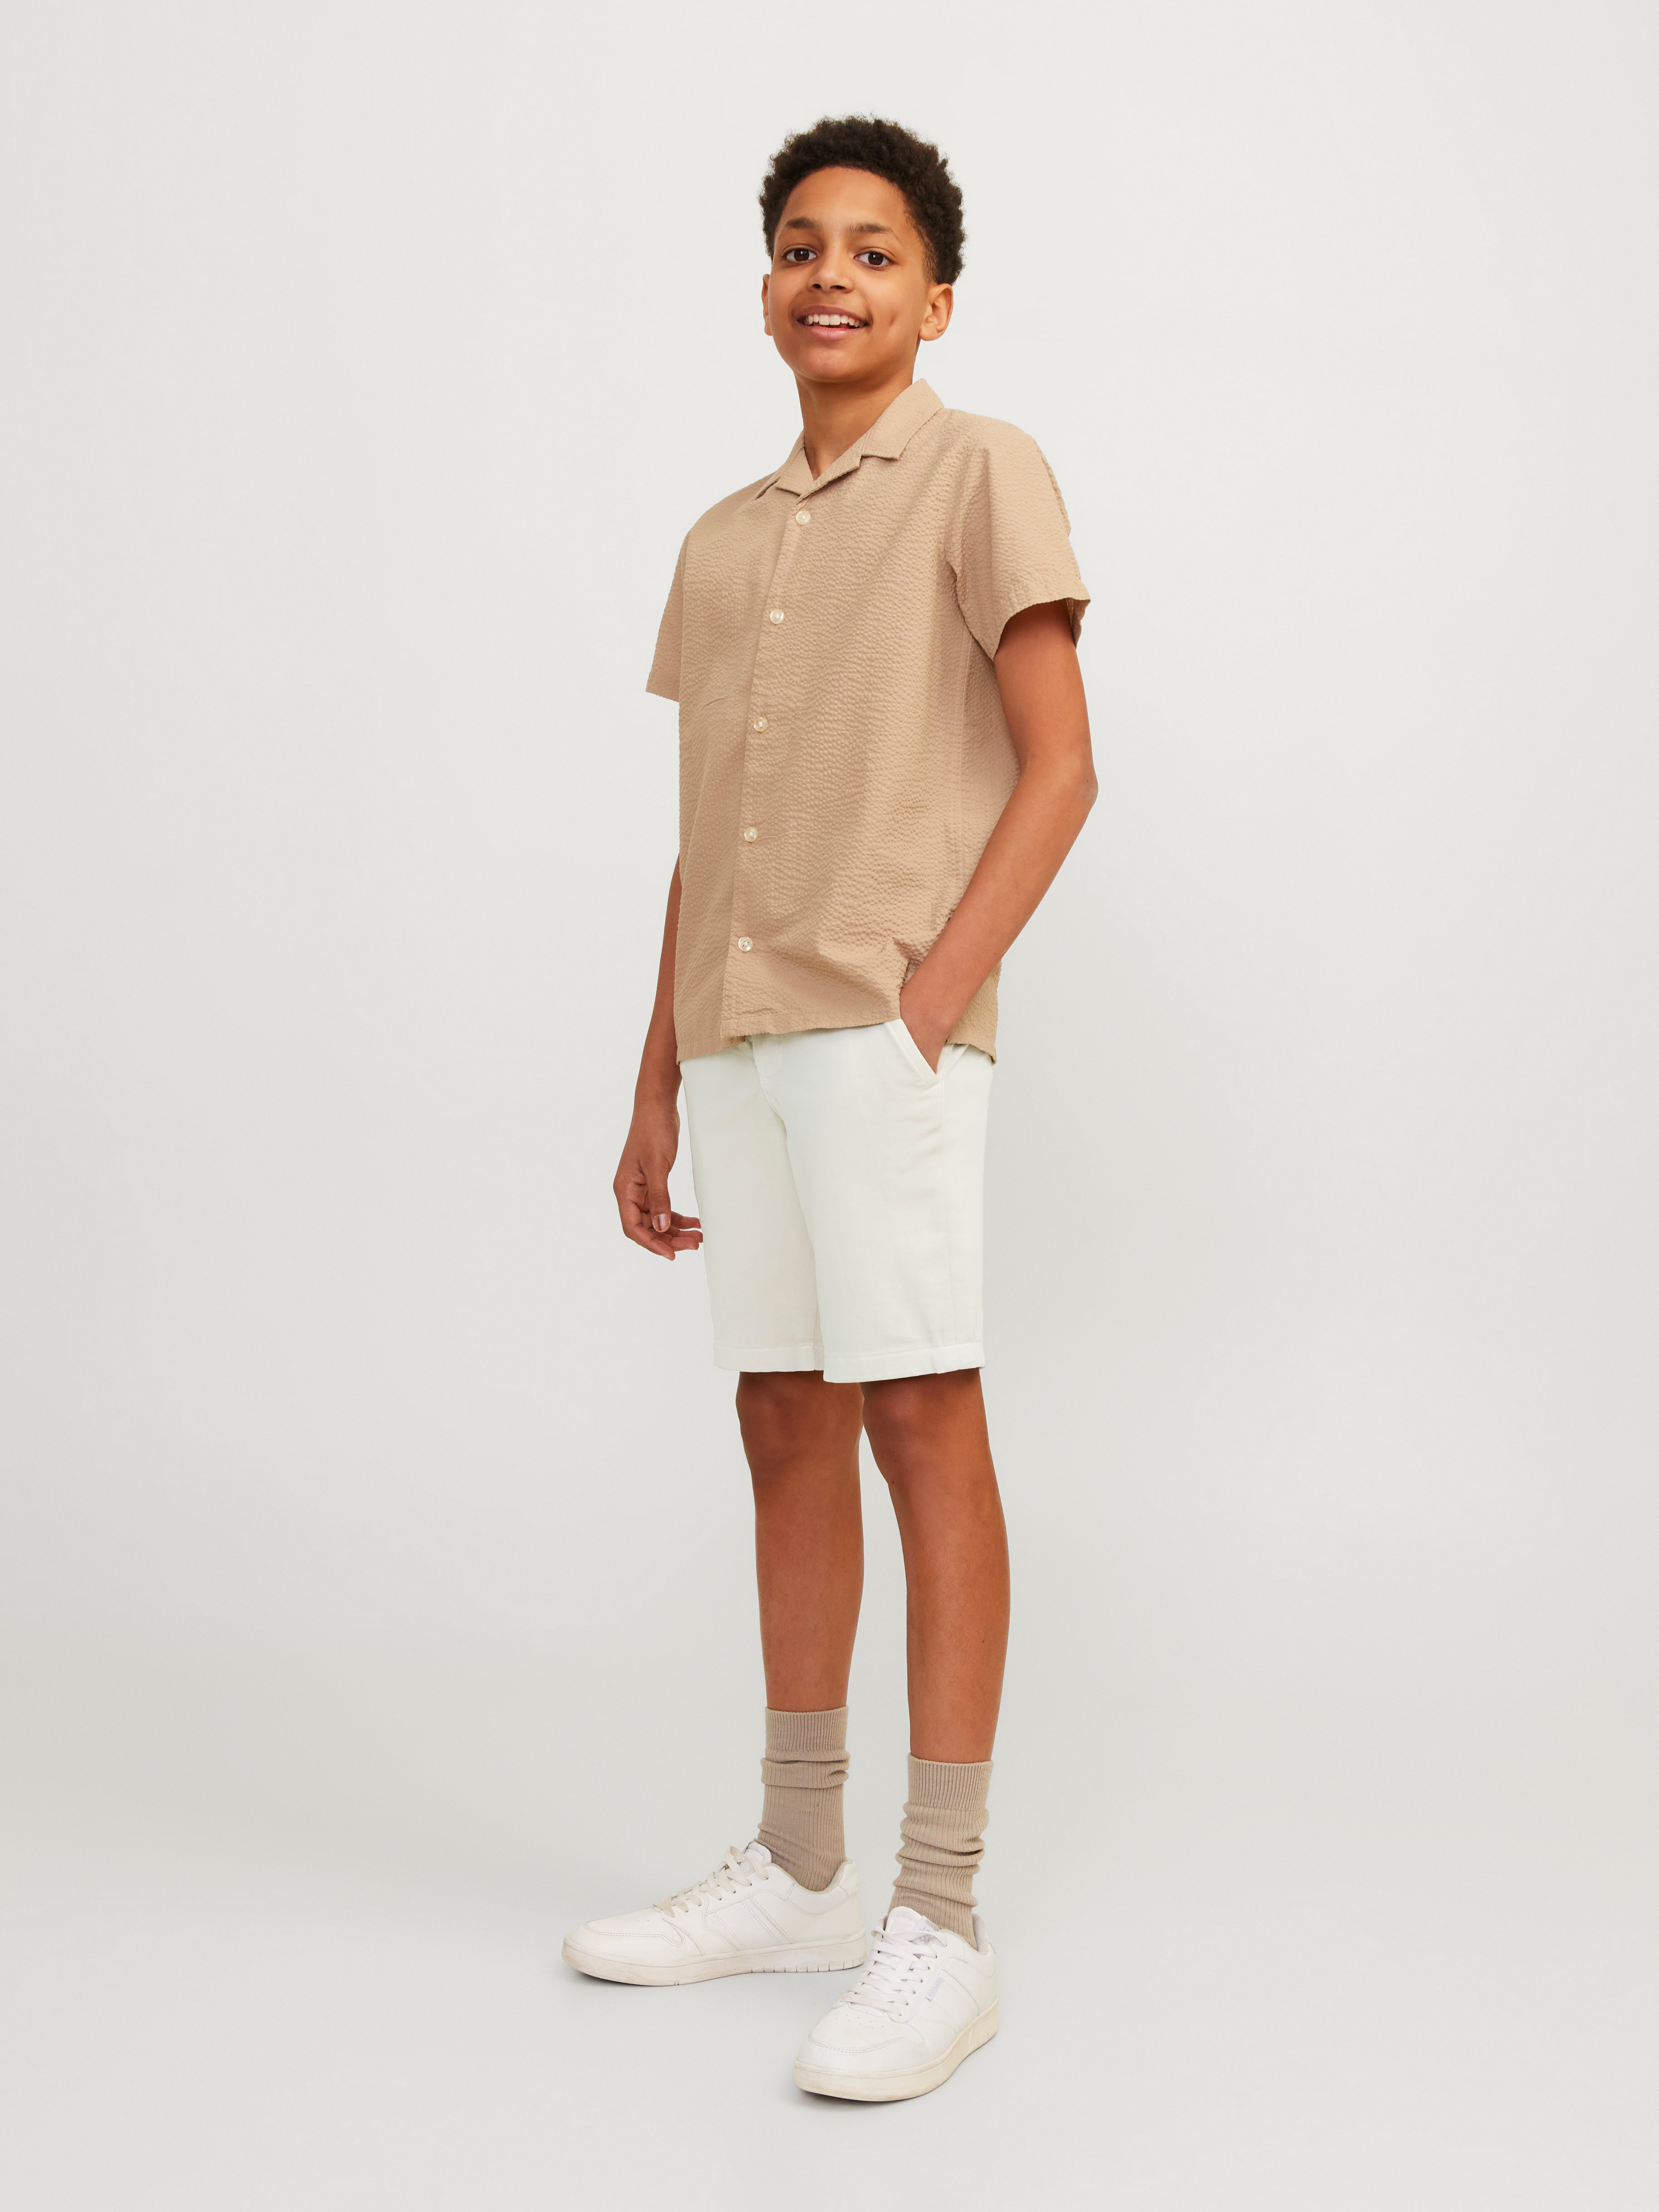 Relaxed Fit Jogger shorts For boys